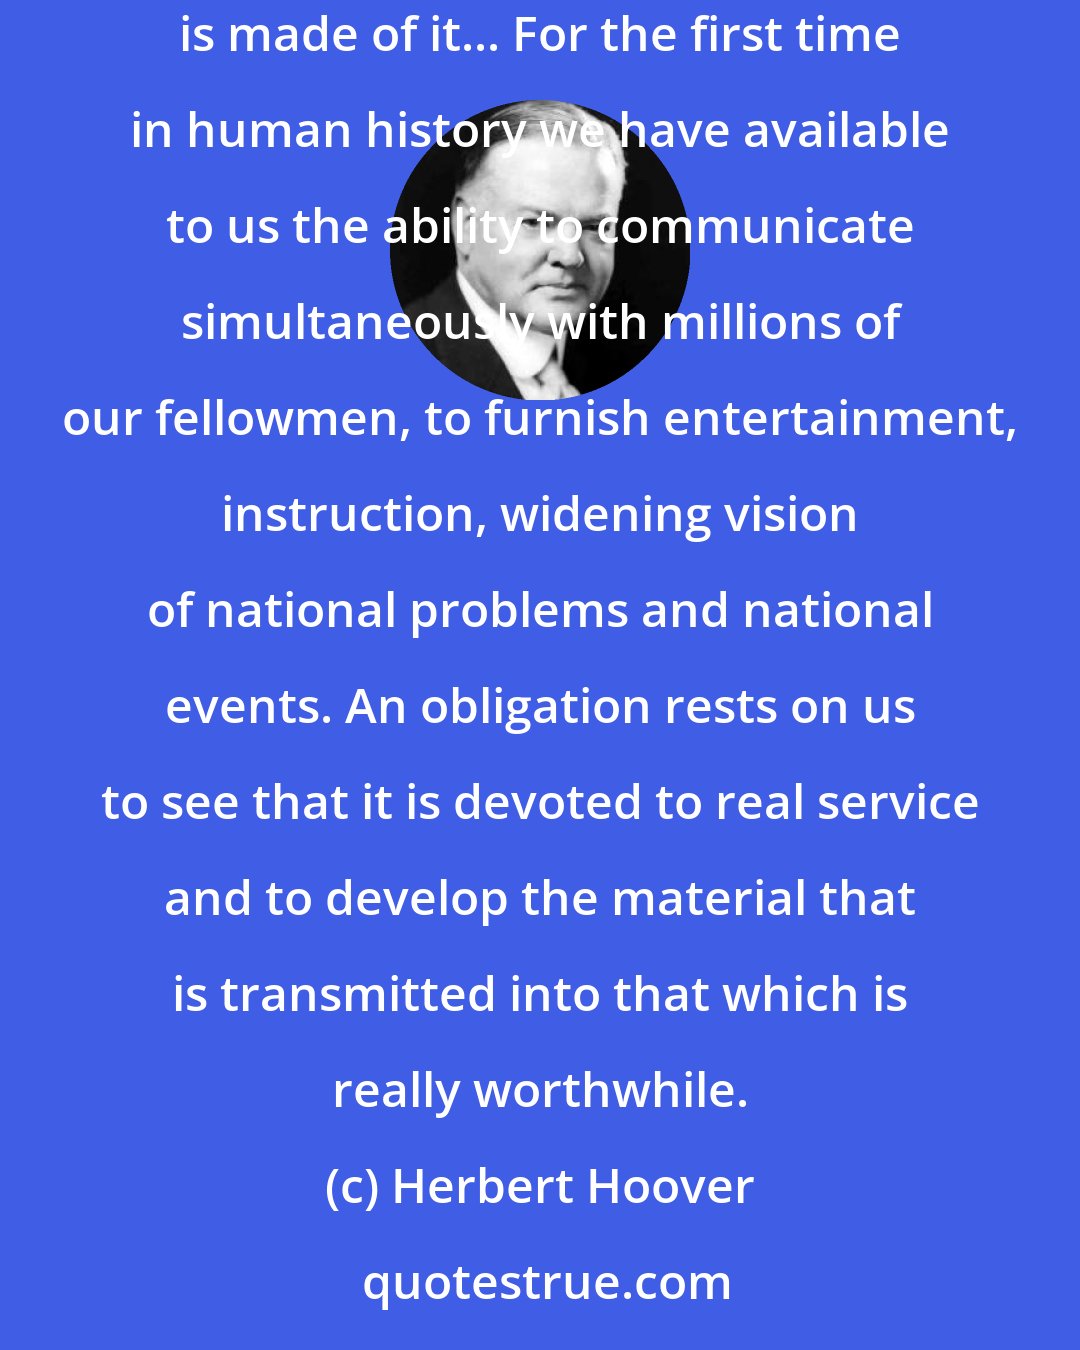 Herbert Hoover: Let us not forget that the value of this great system does not lie primarily in its extent or even in its efficiency. Its worth depends on the use that is made of it... For the first time in human history we have available to us the ability to communicate simultaneously with millions of our fellowmen, to furnish entertainment, instruction, widening vision of national problems and national events. An obligation rests on us to see that it is devoted to real service and to develop the material that is transmitted into that which is really worthwhile.